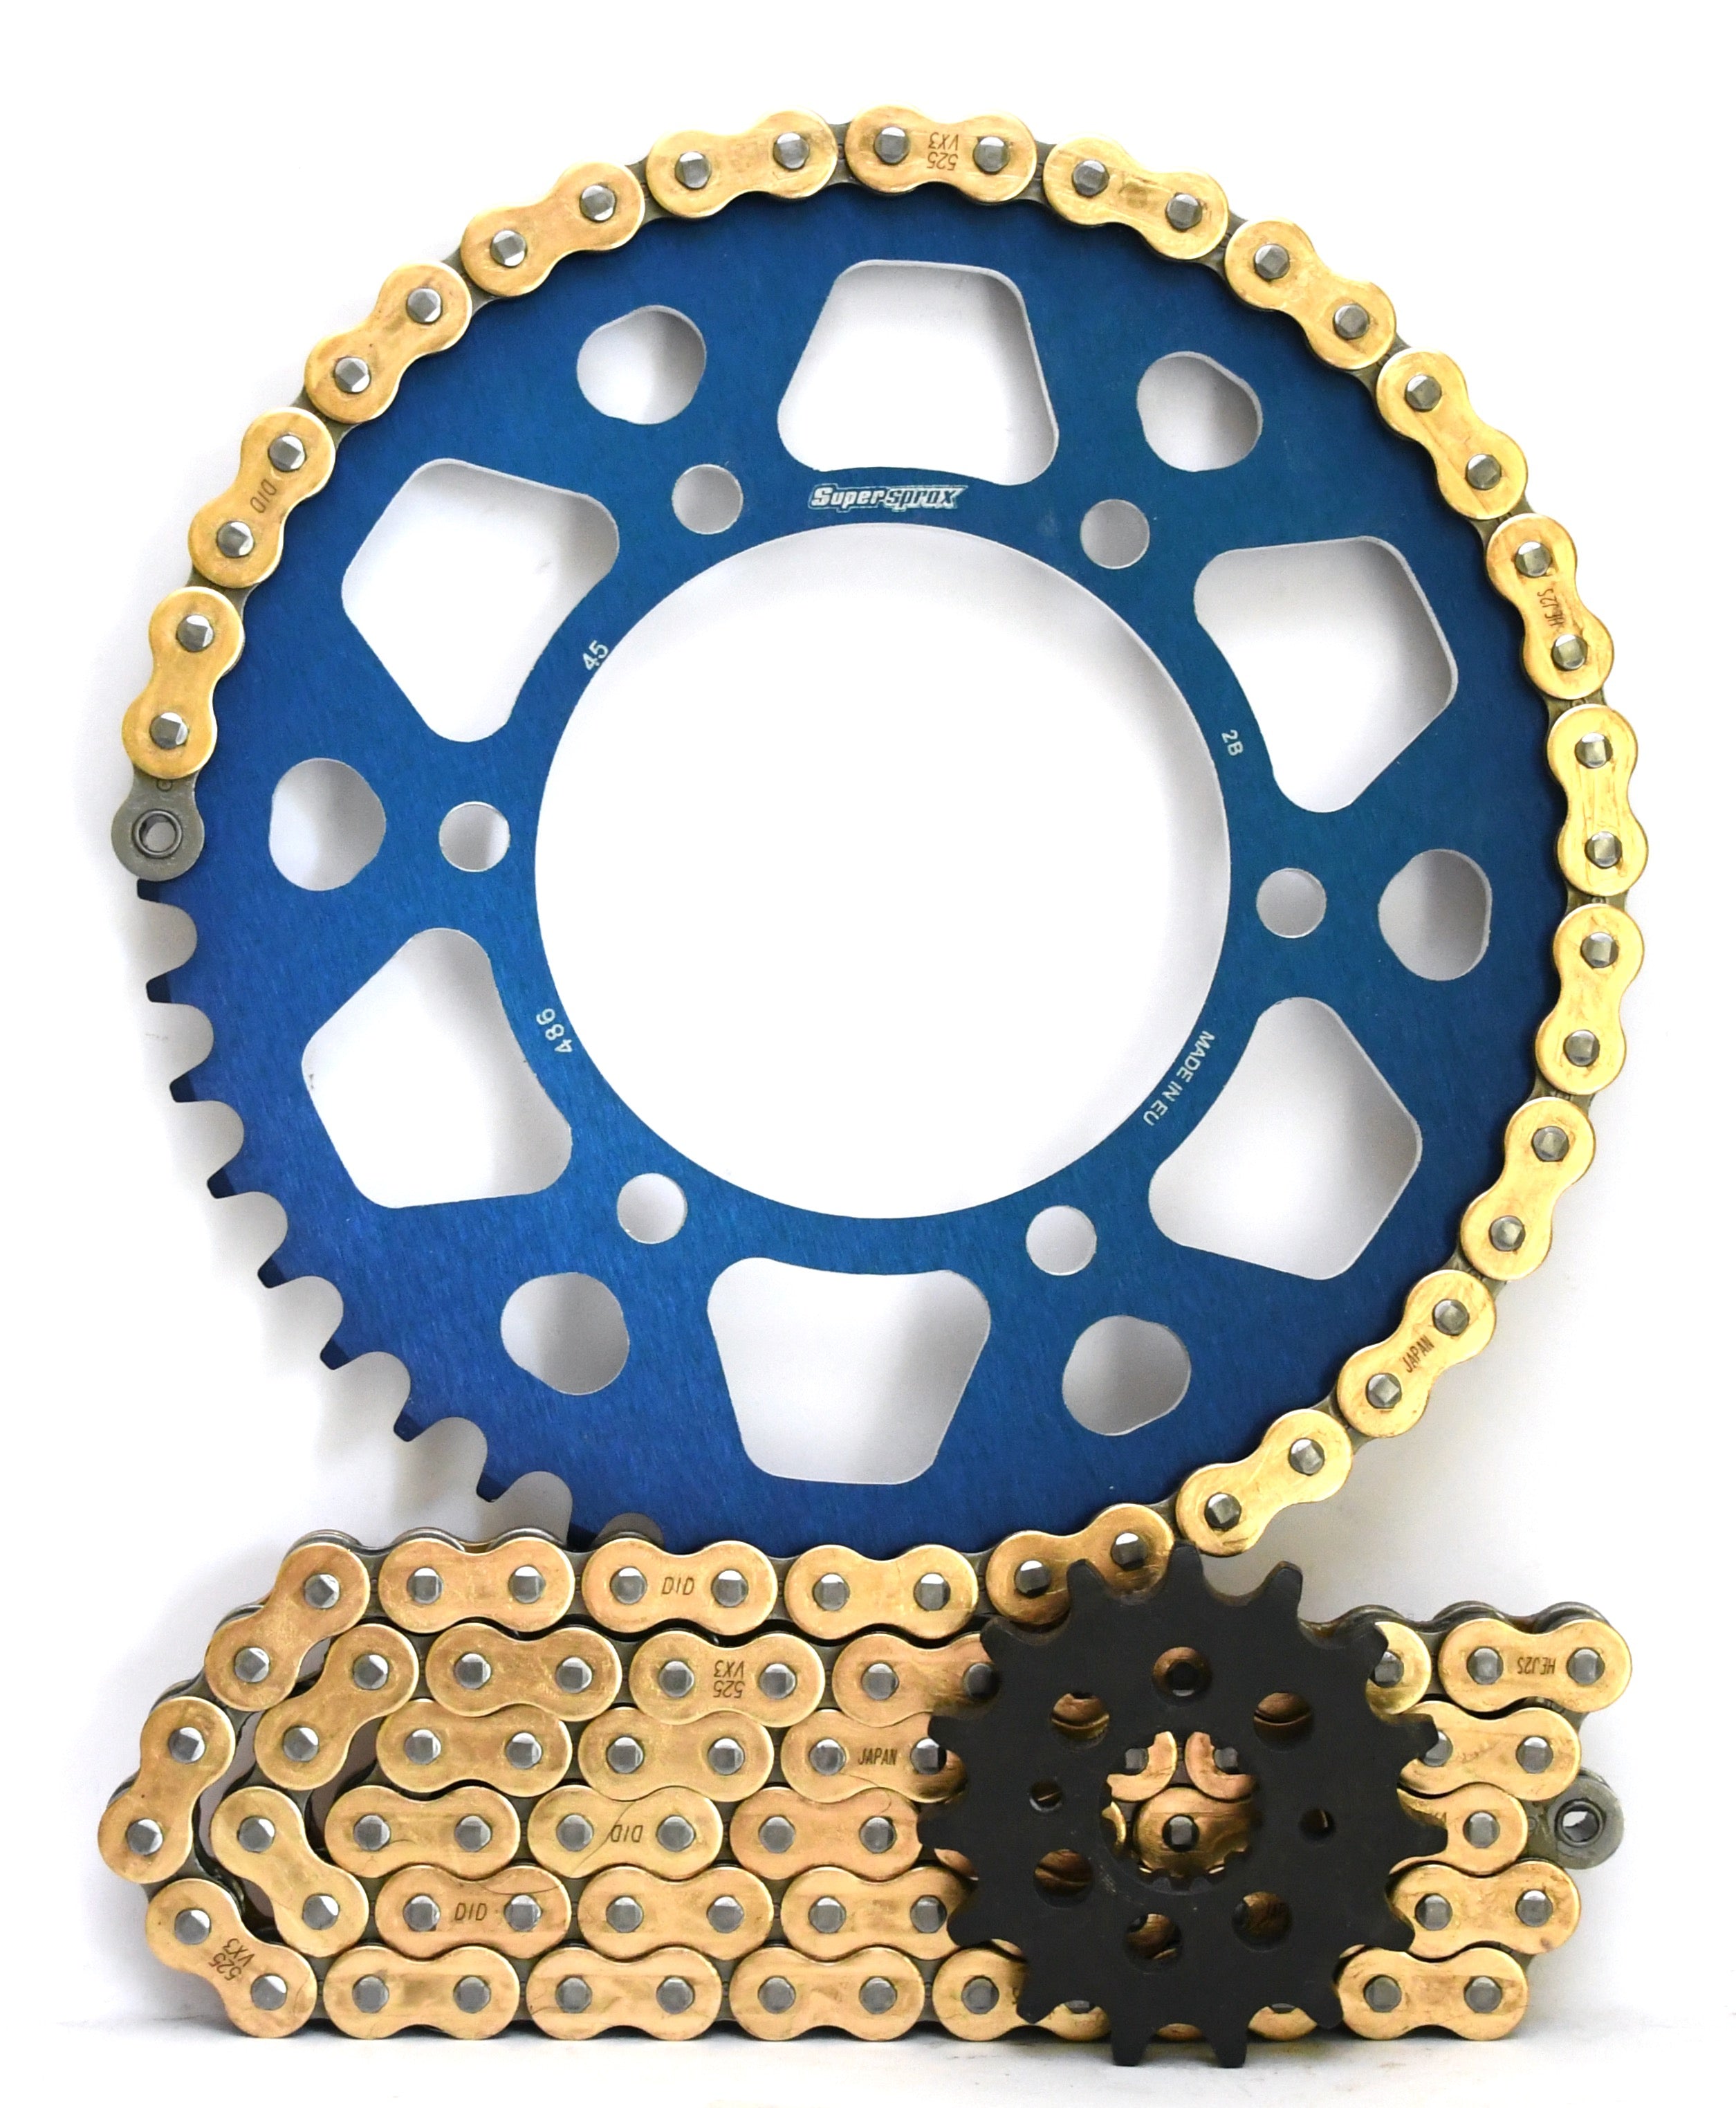 Supersprox and DID Chain & Aluminium Sprocket Kit for Yamaha R1 1998-2003 - 520 Conversion - Standard Gearing